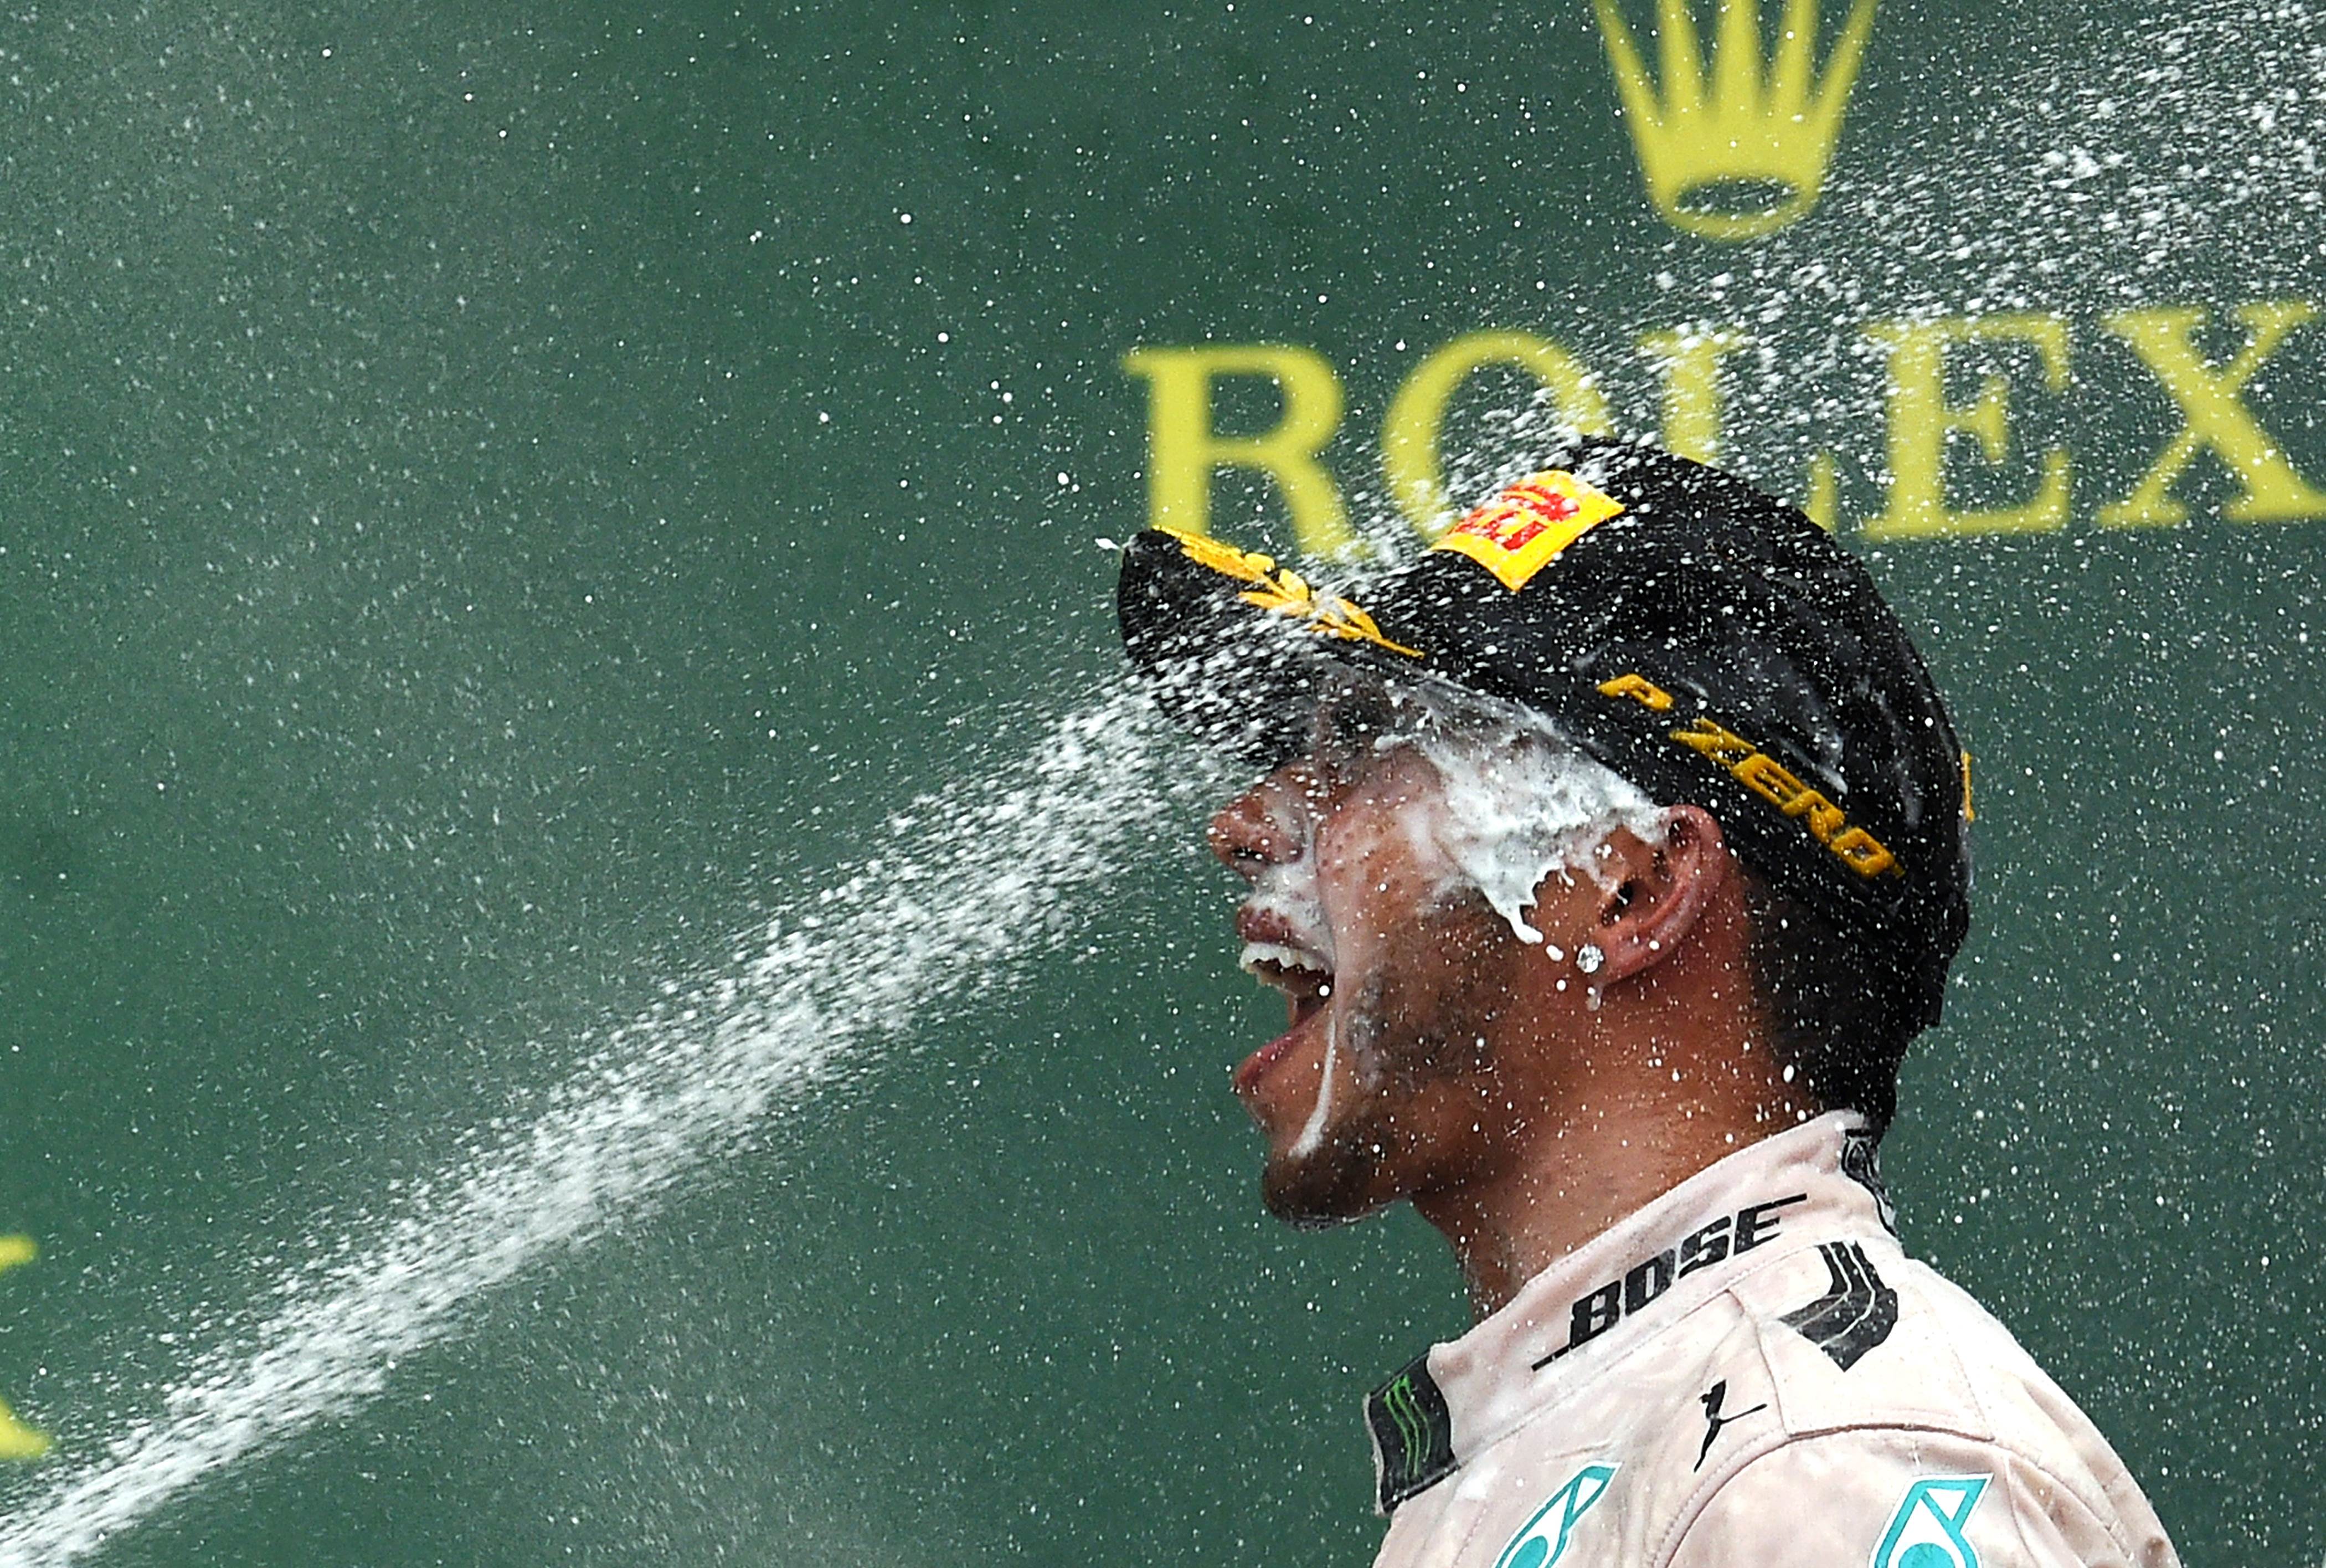 Mercedes driver Lewis Hamilton celebrates is saoked on champagne on the podium after winning the US Formula One Grand Prix at the Circuit of The Americas in Austin, Texas.  Photo: AFP